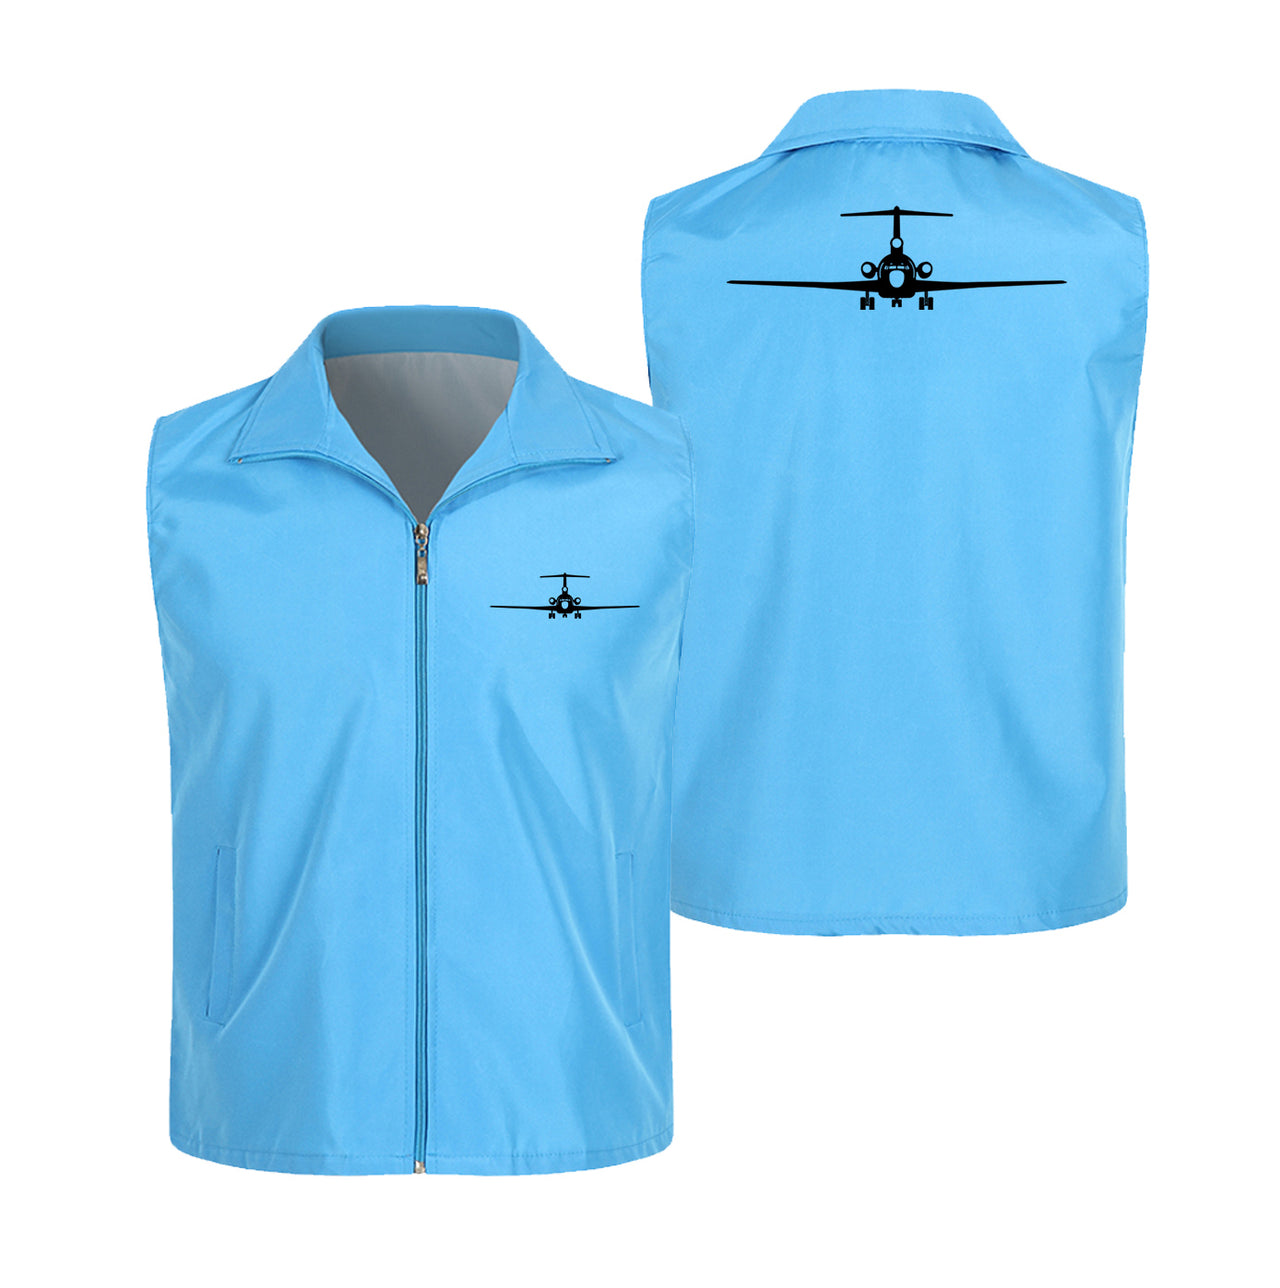 Boeing 727 Silhouette Designed Thin Style Vests